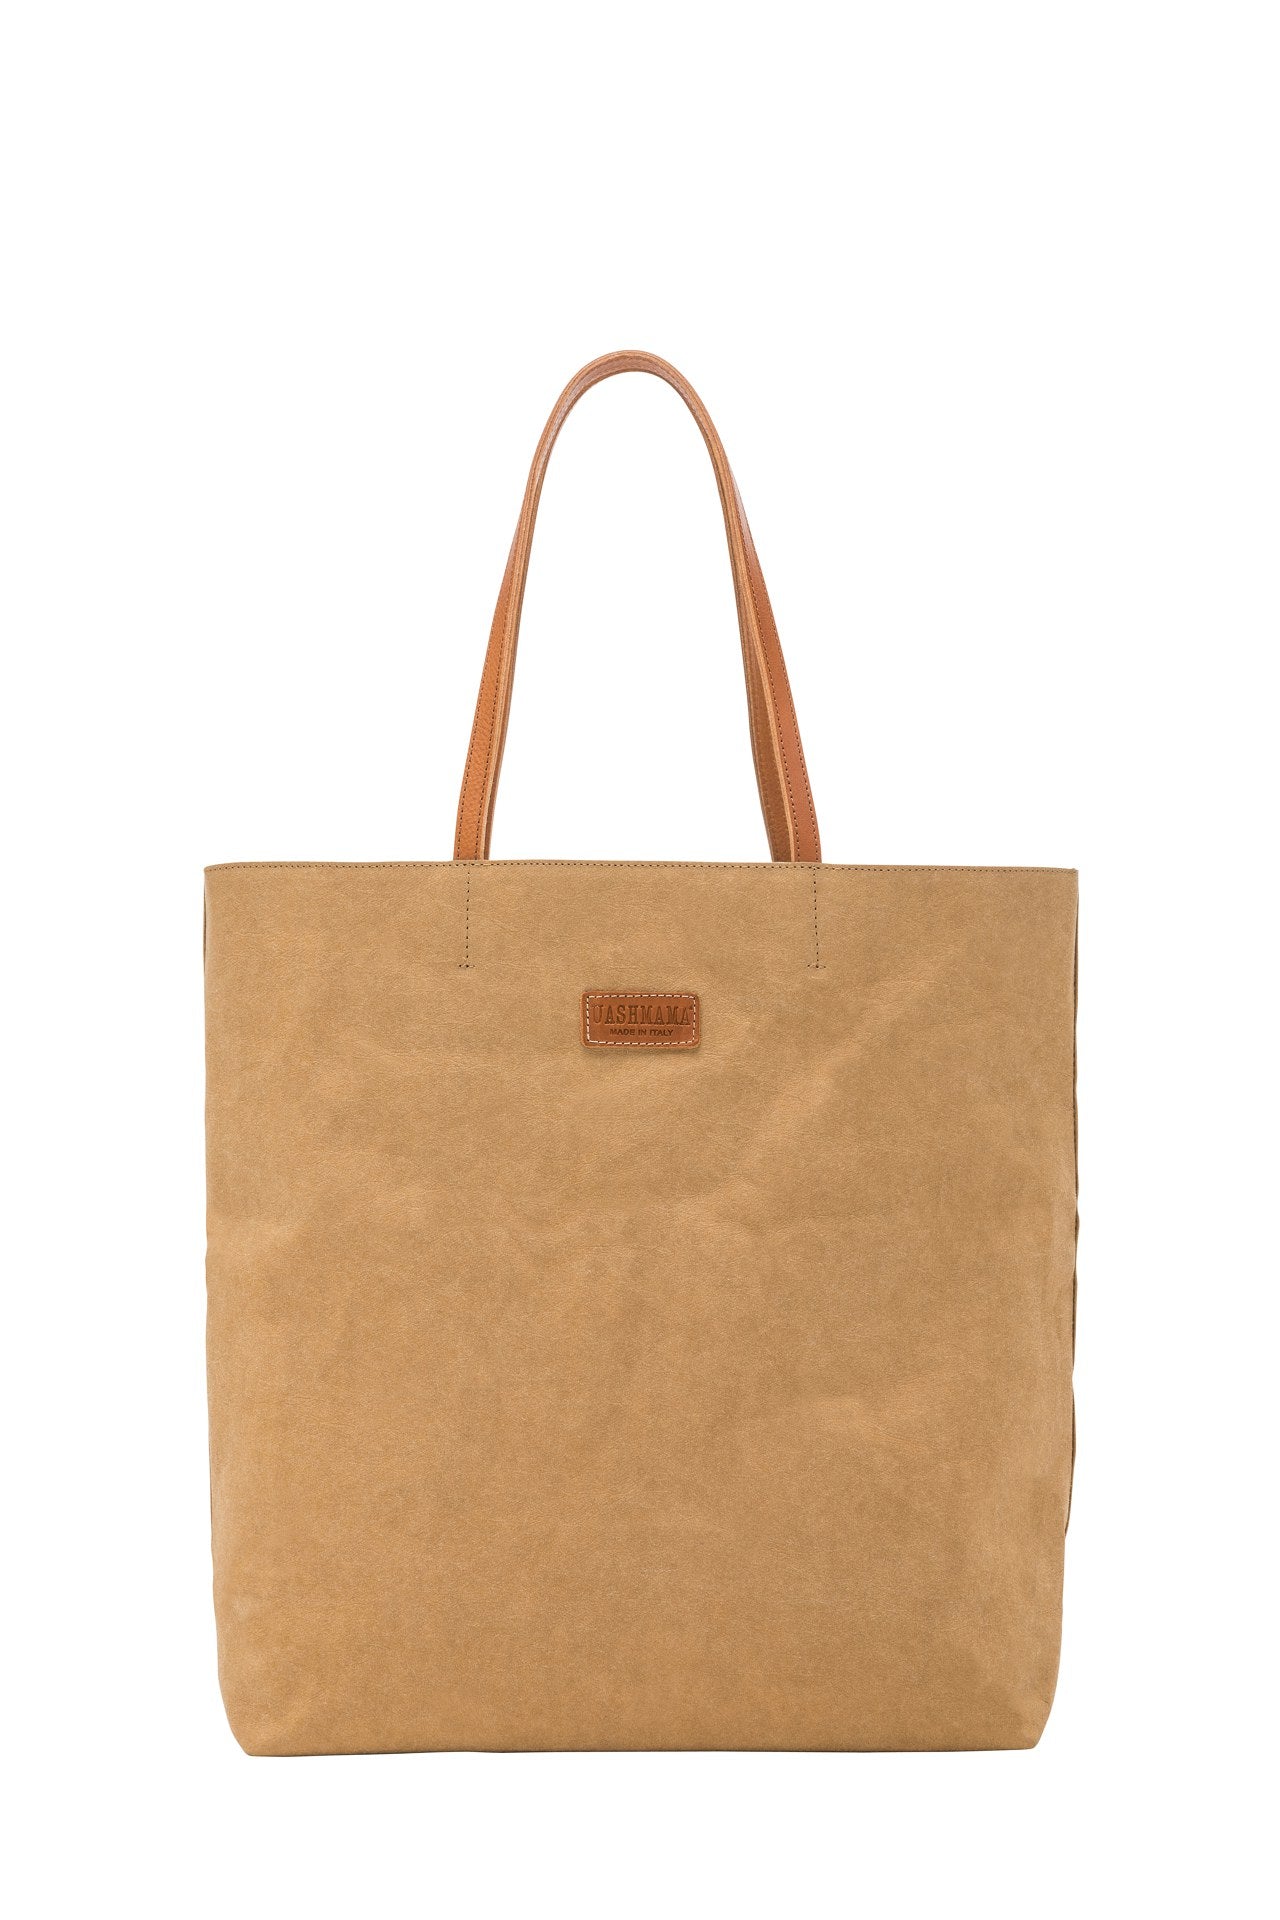 A washable paper tote back is shown. It has two long leather handles and small leather UASHMAMA label on the front. It is shown in a tan colour.